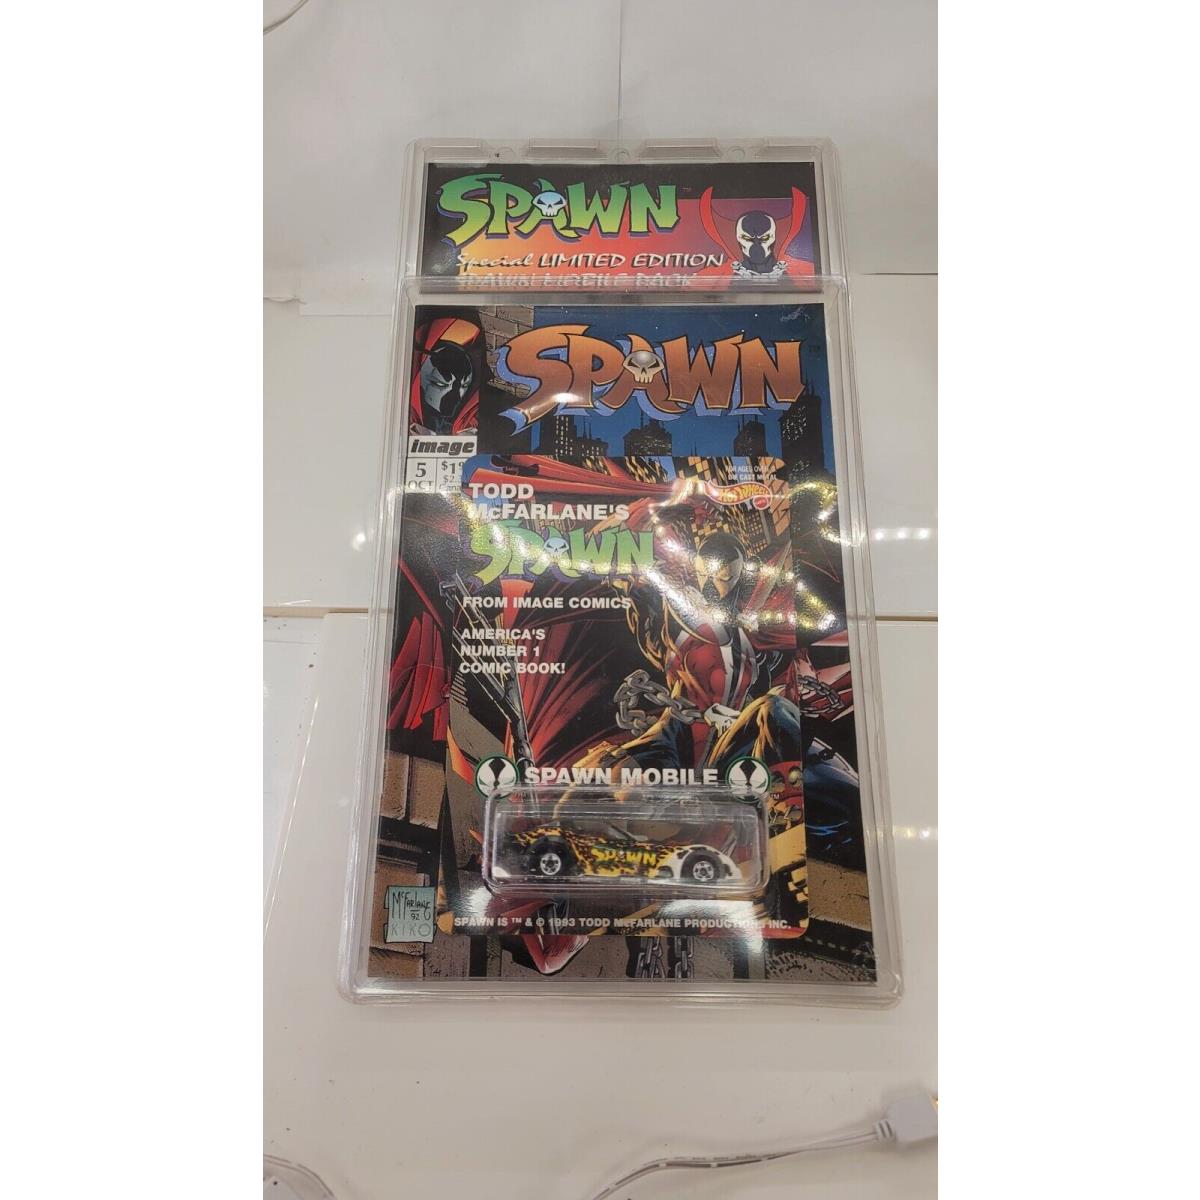 Spawn Funny Car Oct 5 Comic Book Limited Edition - 1993 Hot Wheels Mal KT99